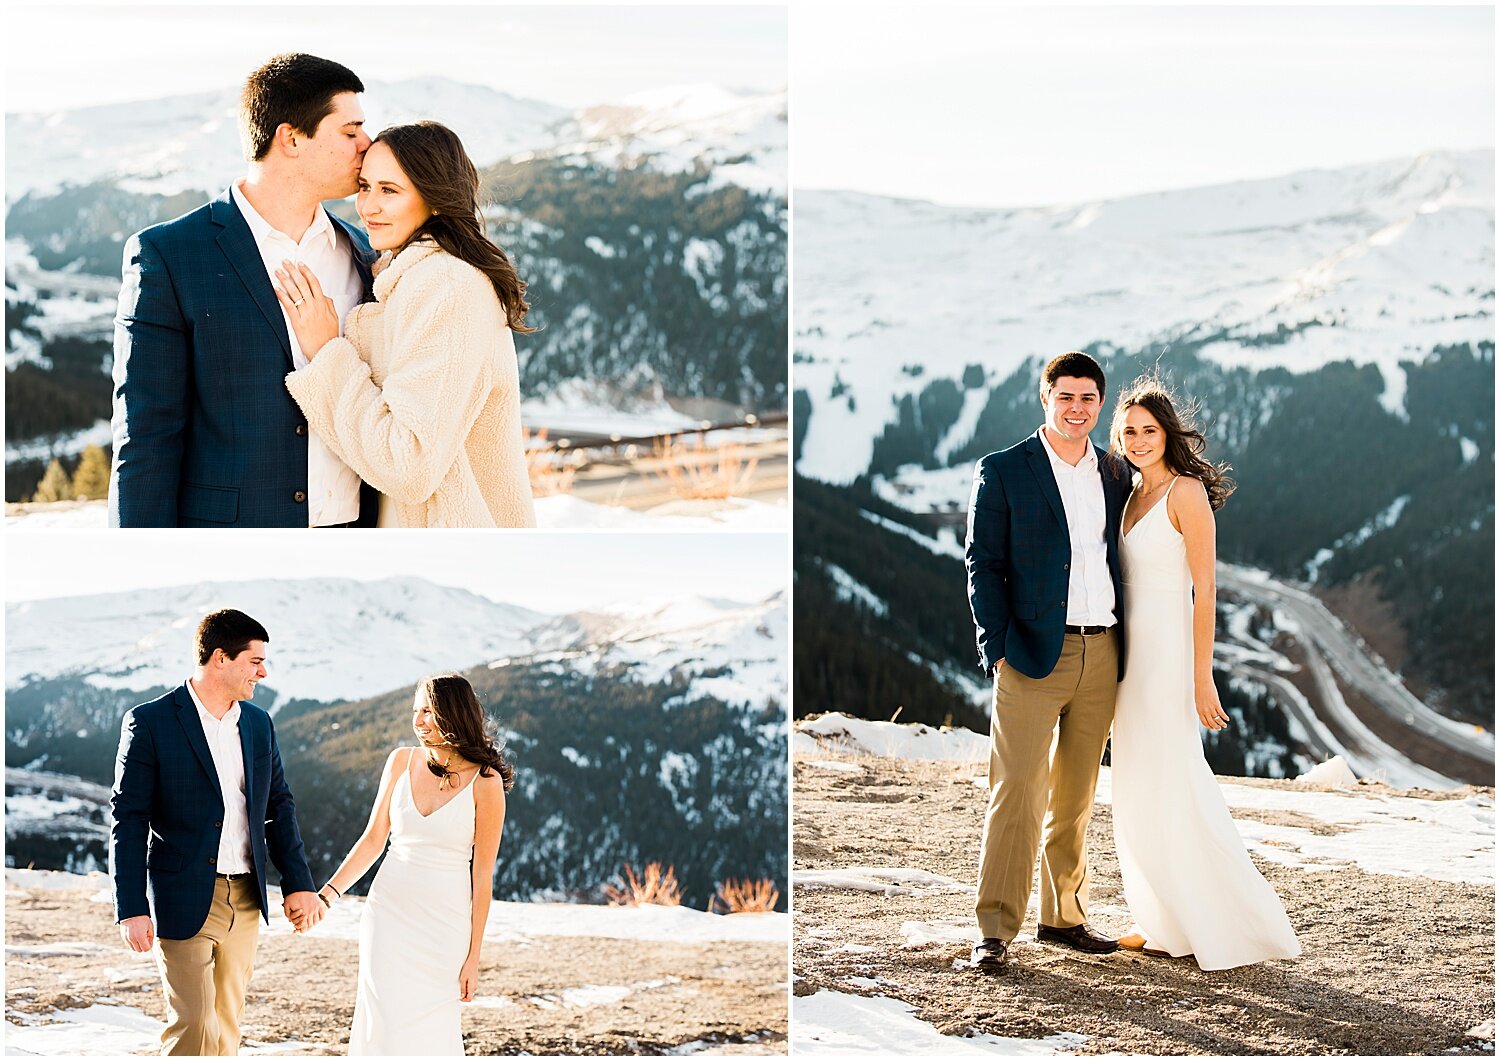 Continental-Divide-Engagement-Photography-Dillon-Colorado-Photographer-Winter-Engaged-04.jpg